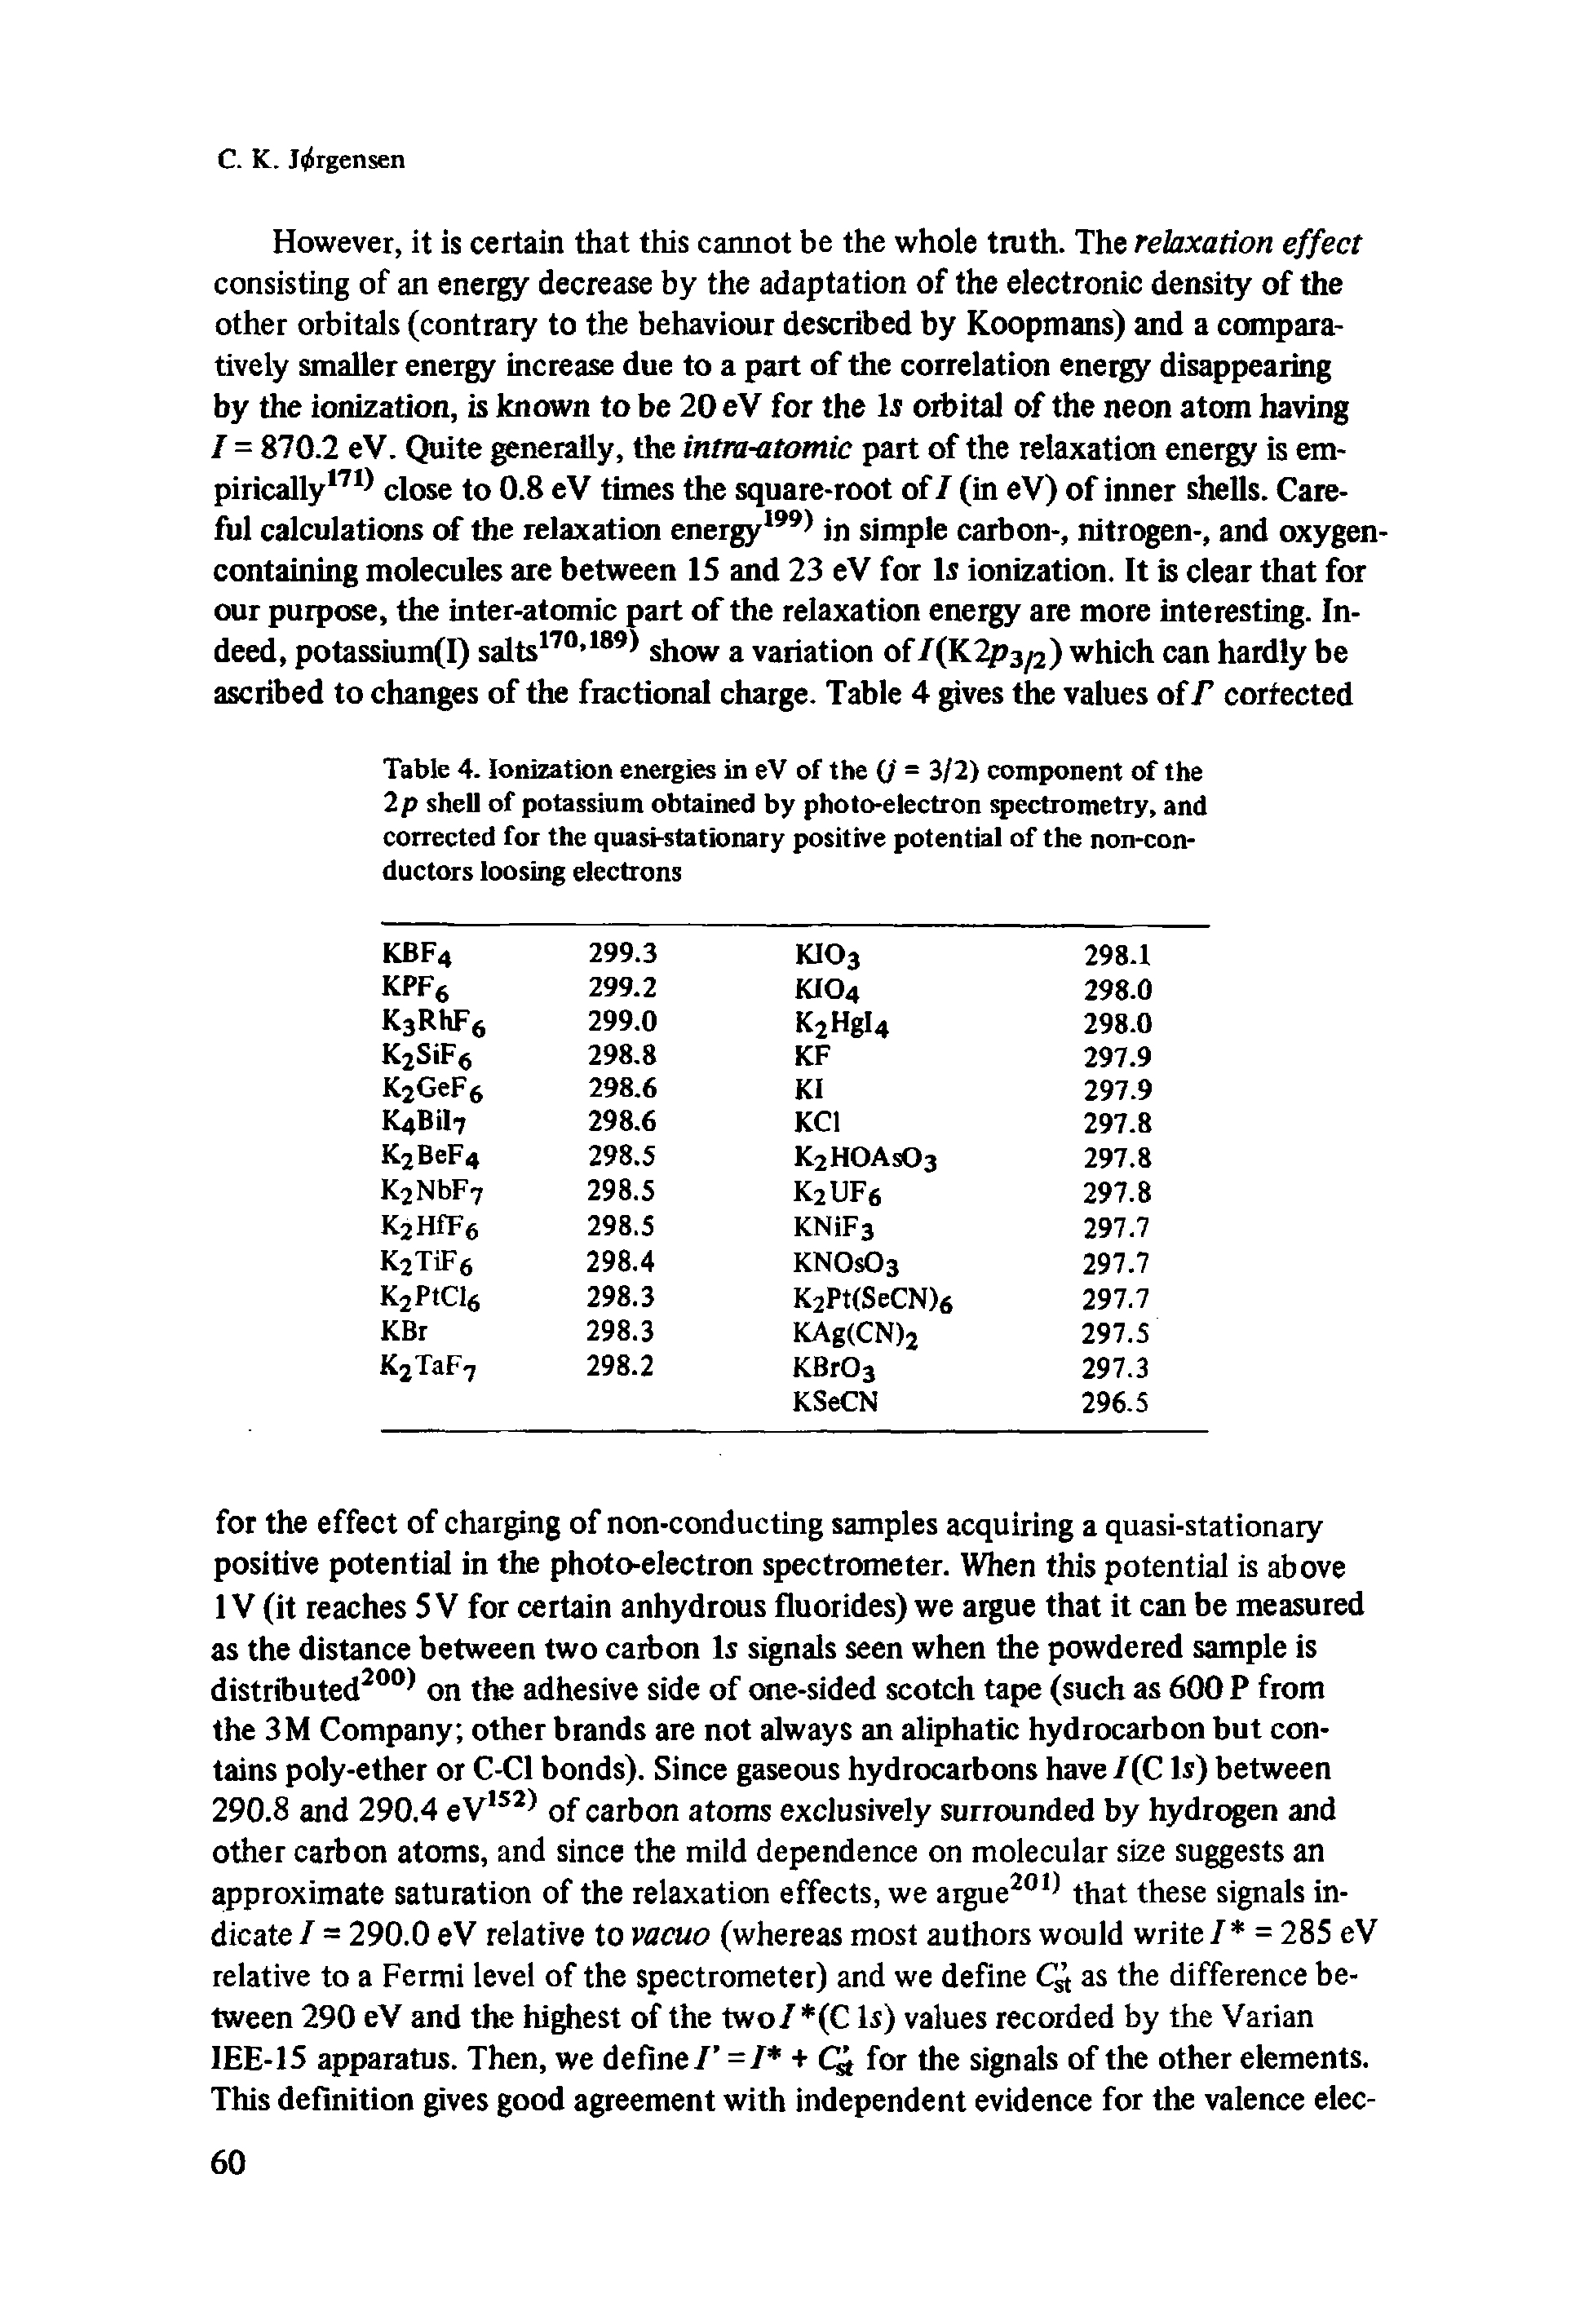 Table 4. Ionization energies in eV of the (J = 3/2) component of the 2 p shell of potassium obtained by photo-electron spectrometry, and corrected for the quasi-stationary positive potential of the non-conductors loosing electrons...